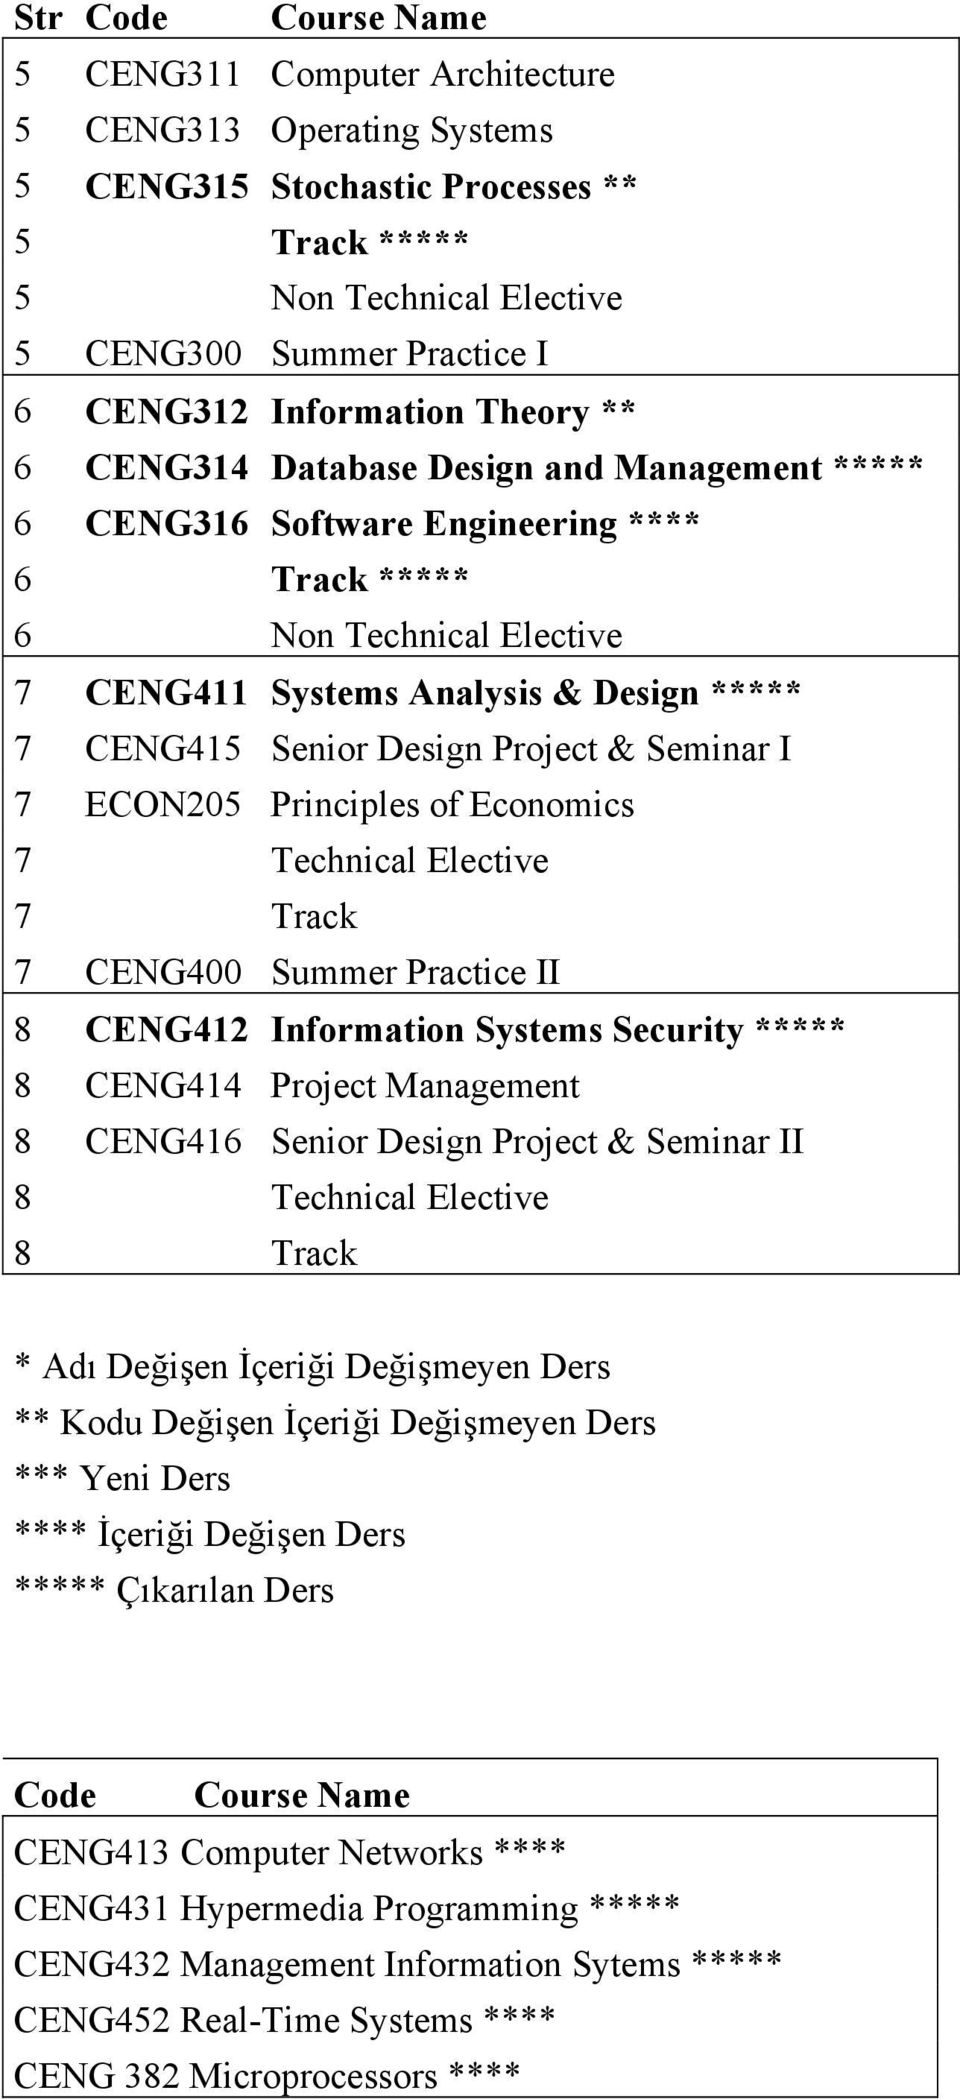 Senior Design Project & Seminar I 7 ECON205 Principles of Economics 7 Technical Elective 7 Track 7 CENG400 Summer Practice II 8 CENG412 Information Systems Security ***** 8 CENG414 Project Management